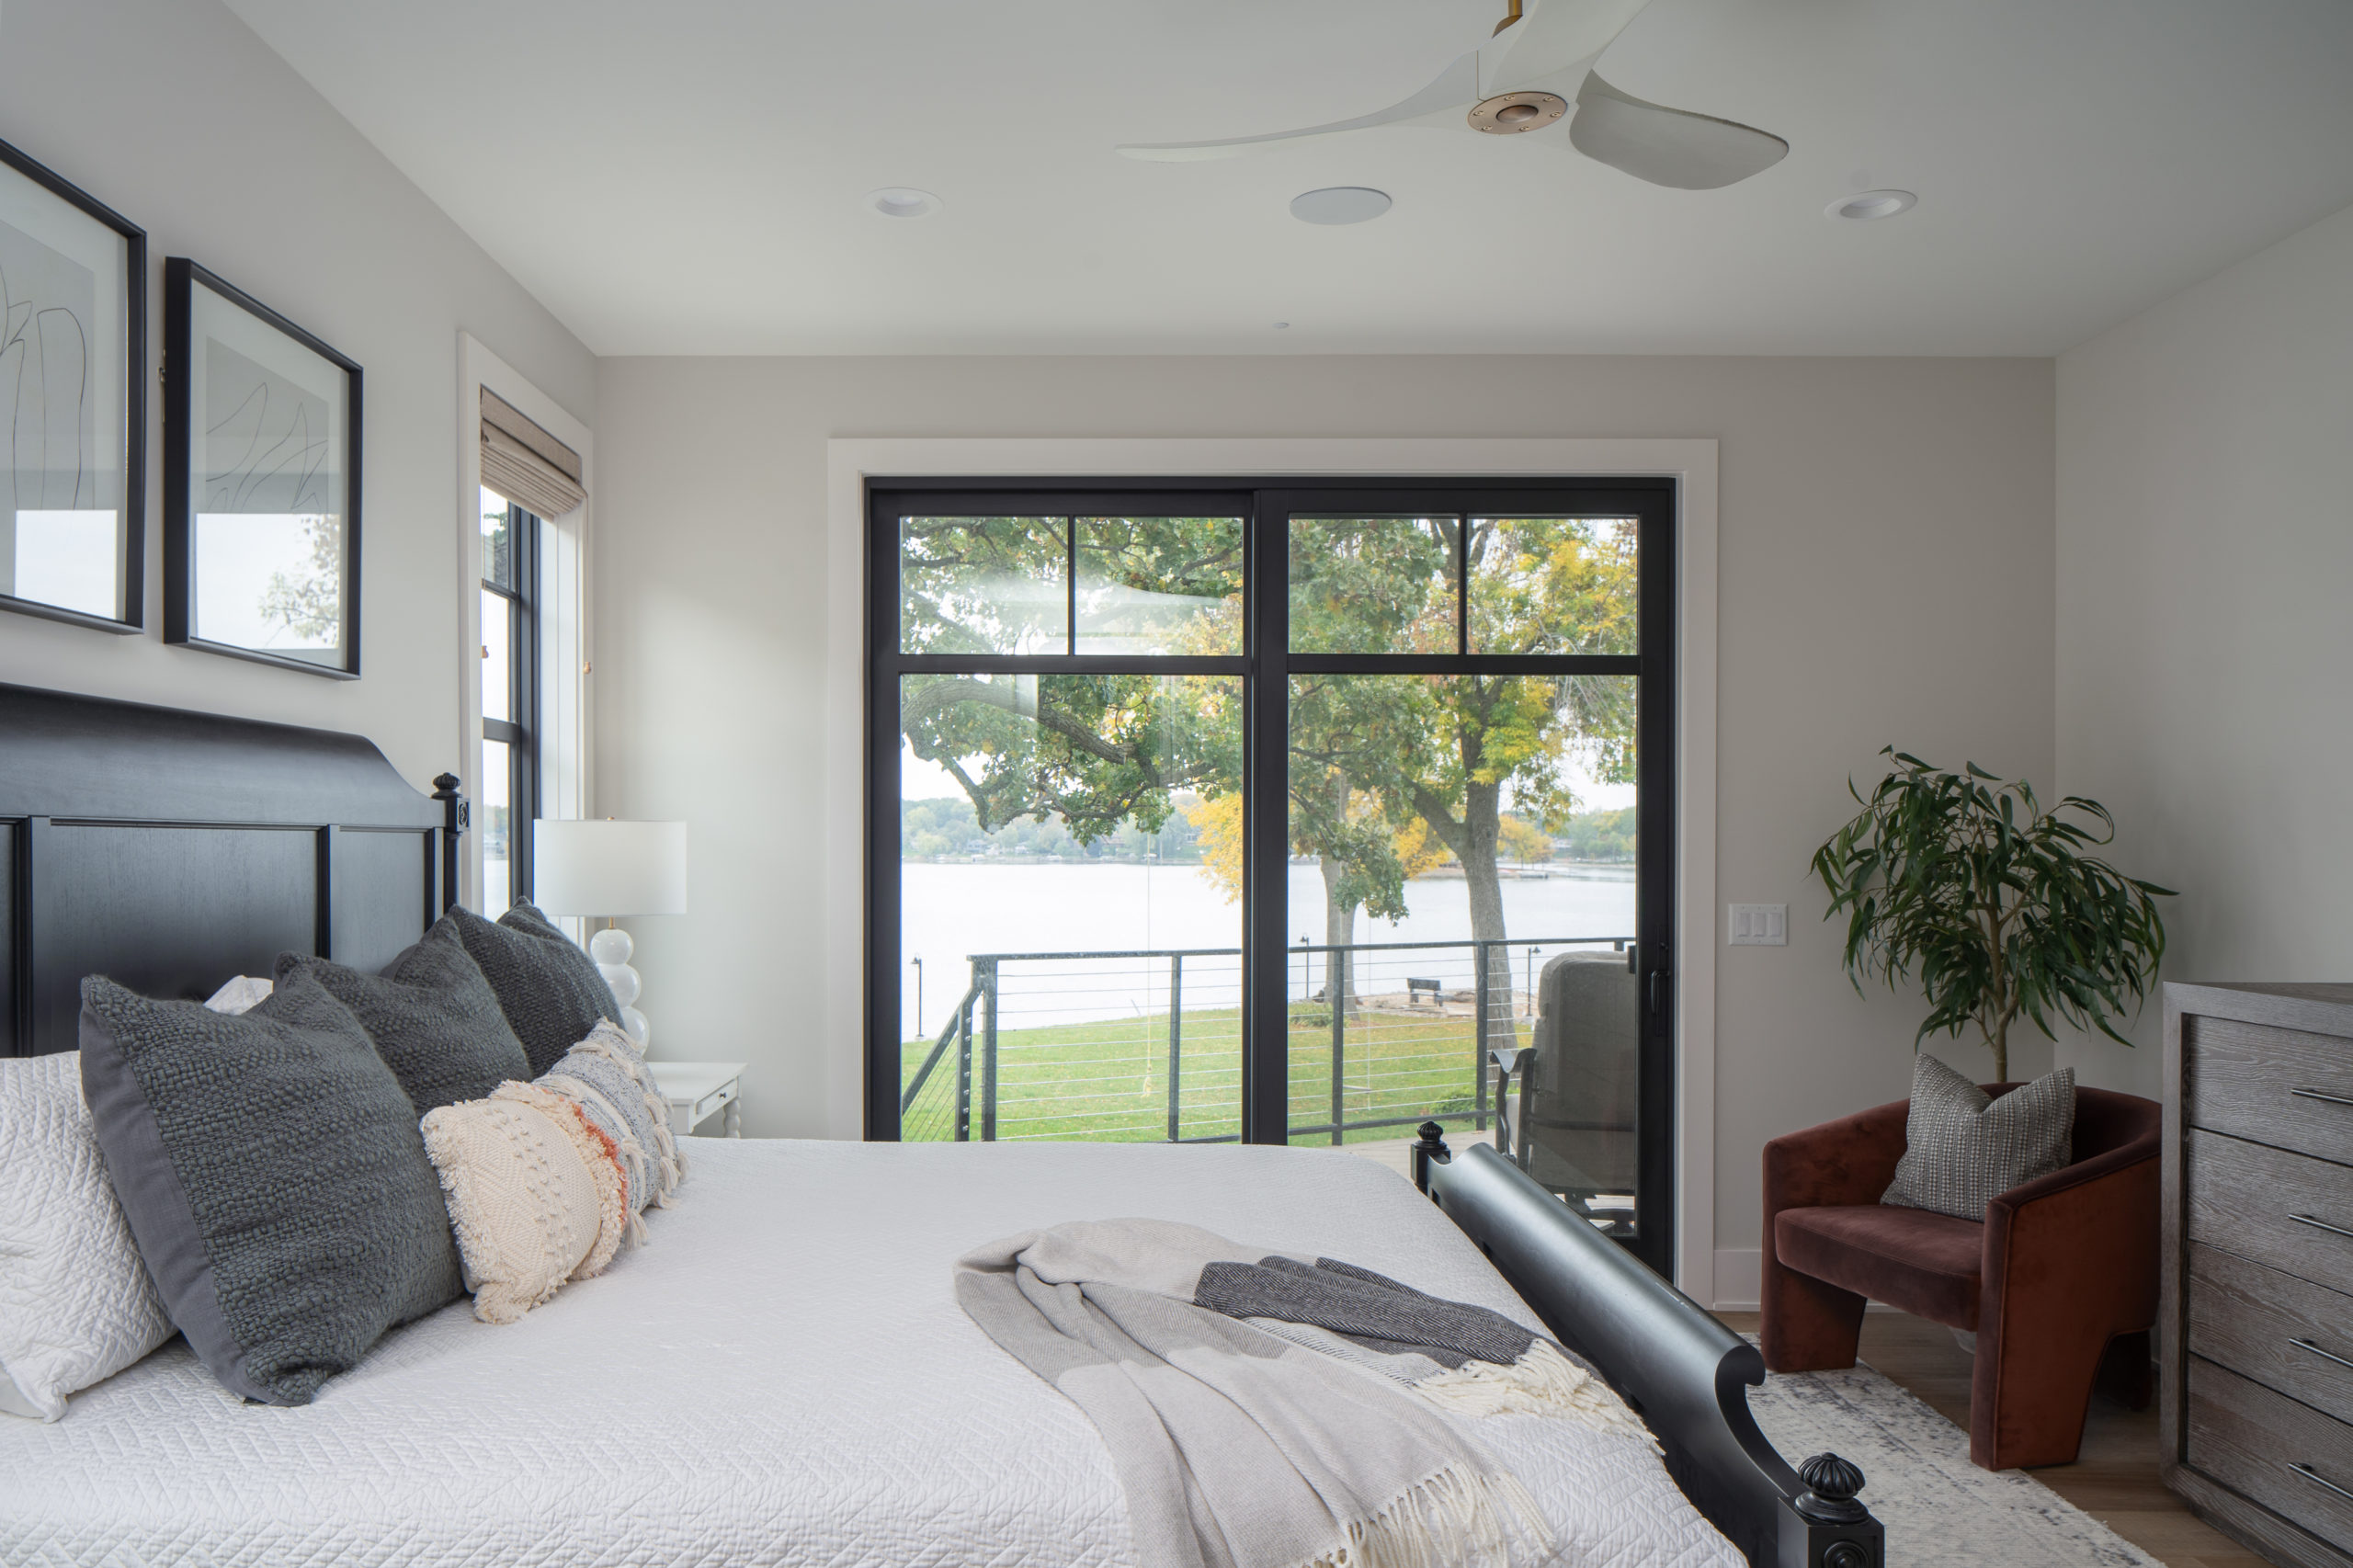 The Lake Escape custom home remodel transformed a bedroom into a serene oasis, complete with a comfortable bed, spacious dresser, and a luxurious sliding glass door.